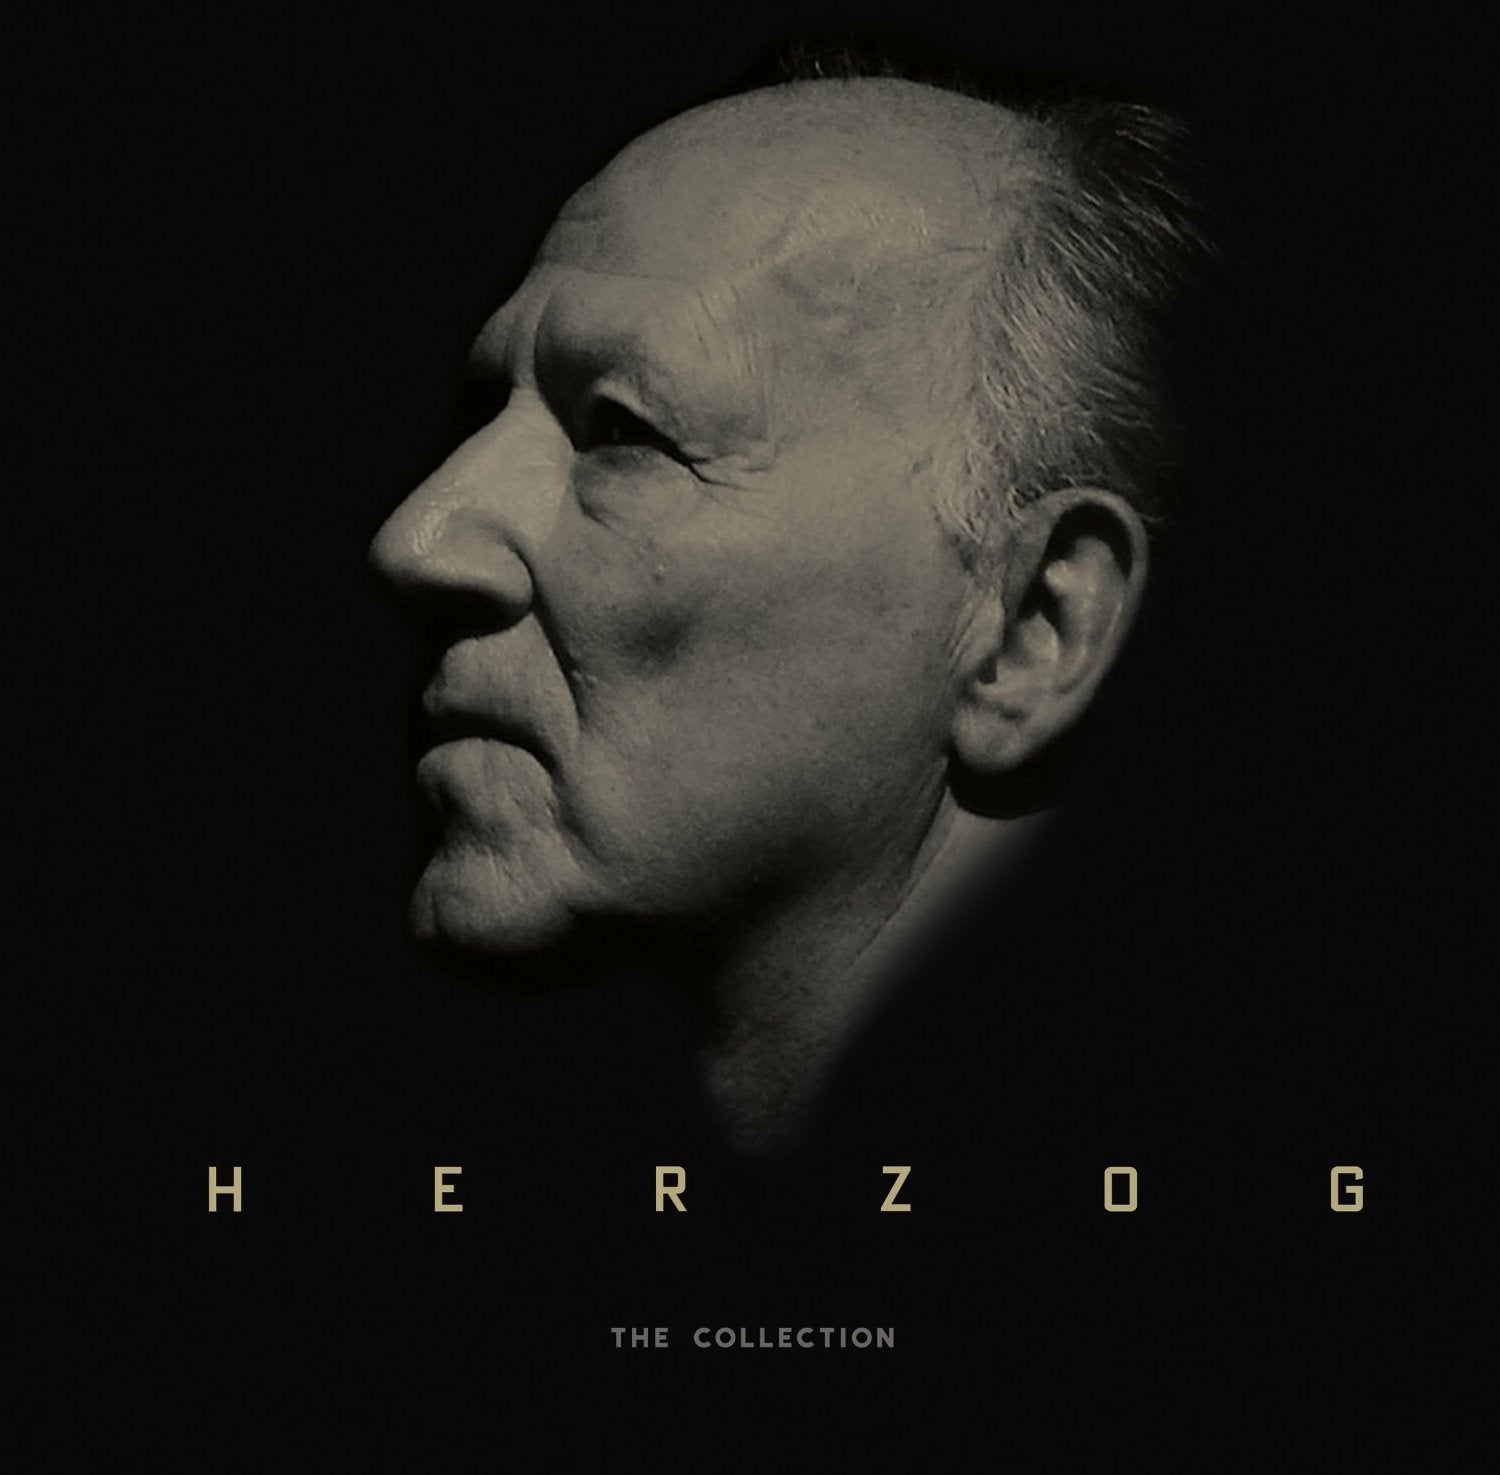 HERZOG: THE COLLECTION BLU-RAY